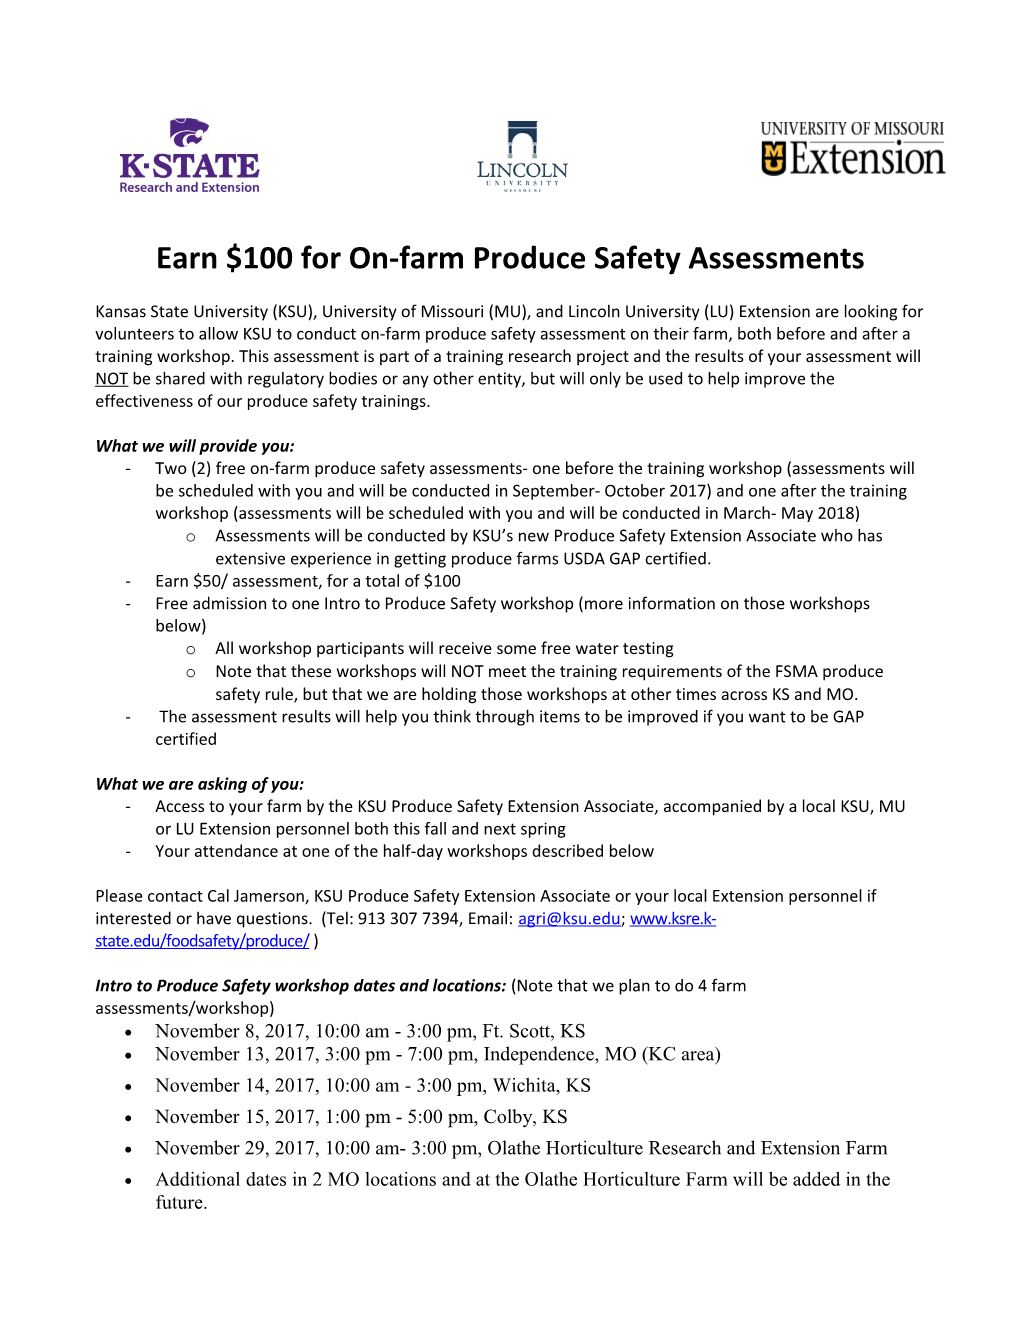 Earn $100 for On-Farm Produce Safety Assessments